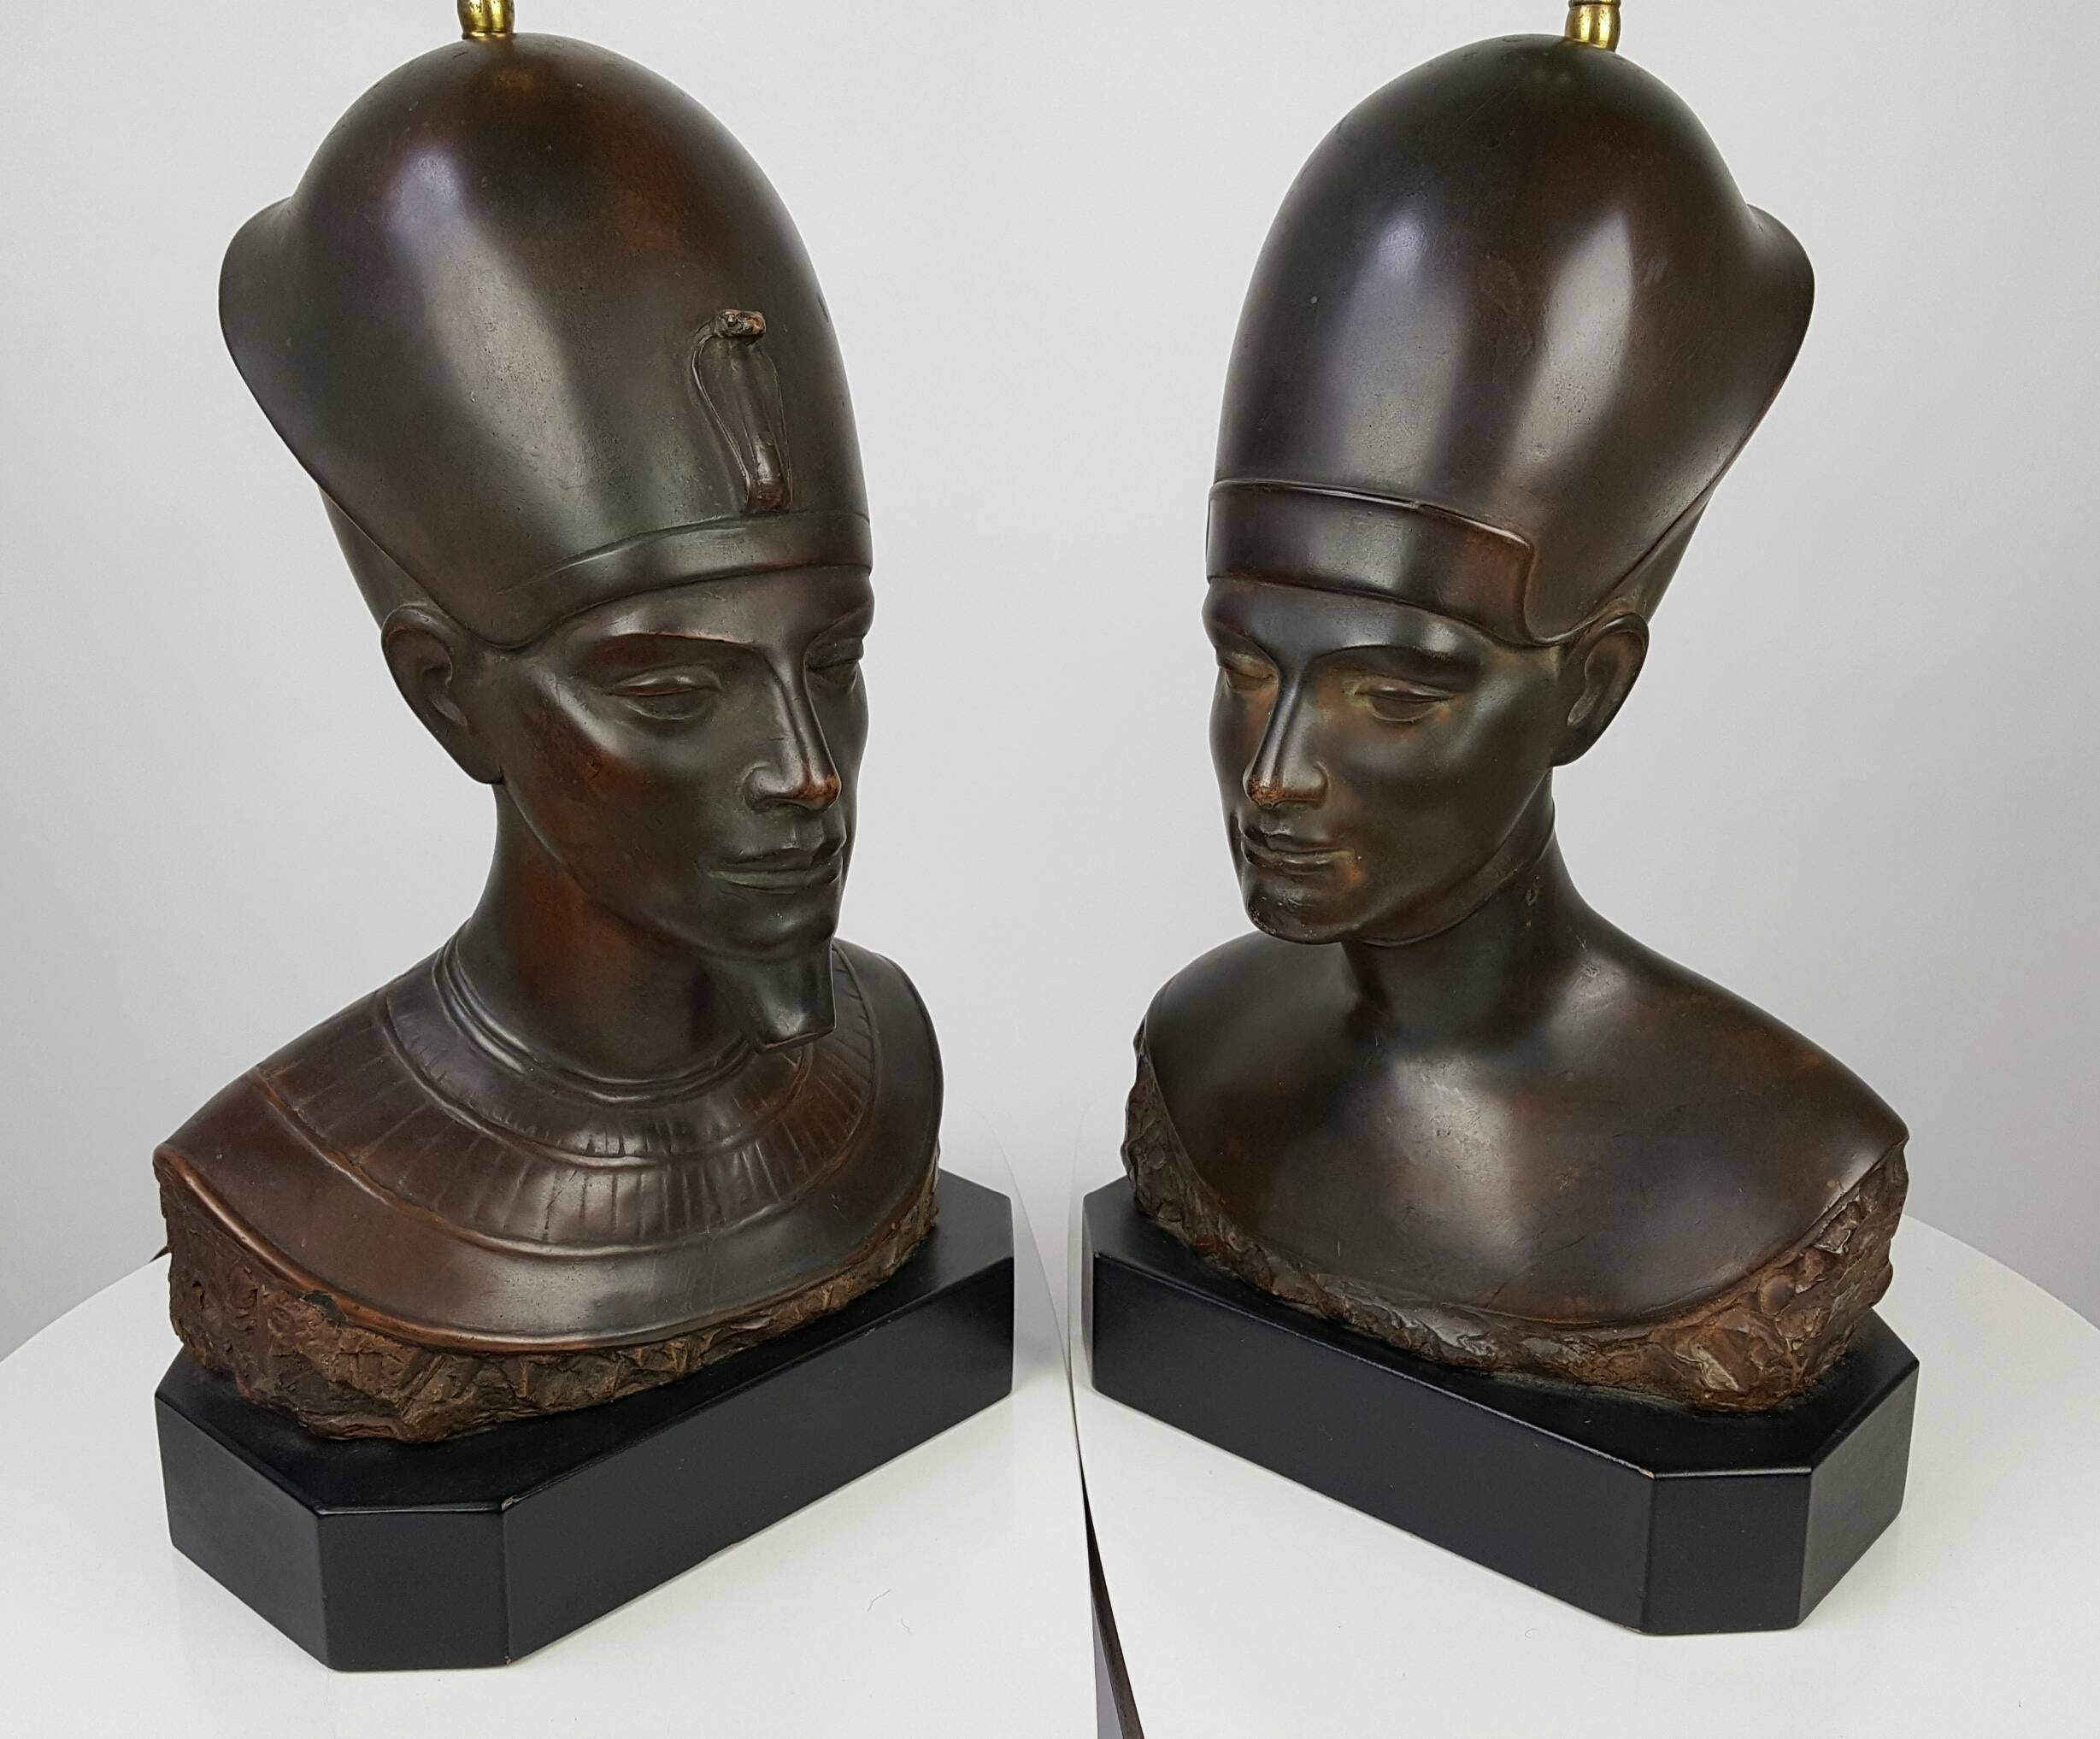 Stunning pair of bronze clad table lamps depicting Egyptian Pharoh (King) and Queen, Nefertiti? Amazing detailed chiseled features, jewels and head piece's, wonderful bronze patina, wooden plints, signed Haruil.